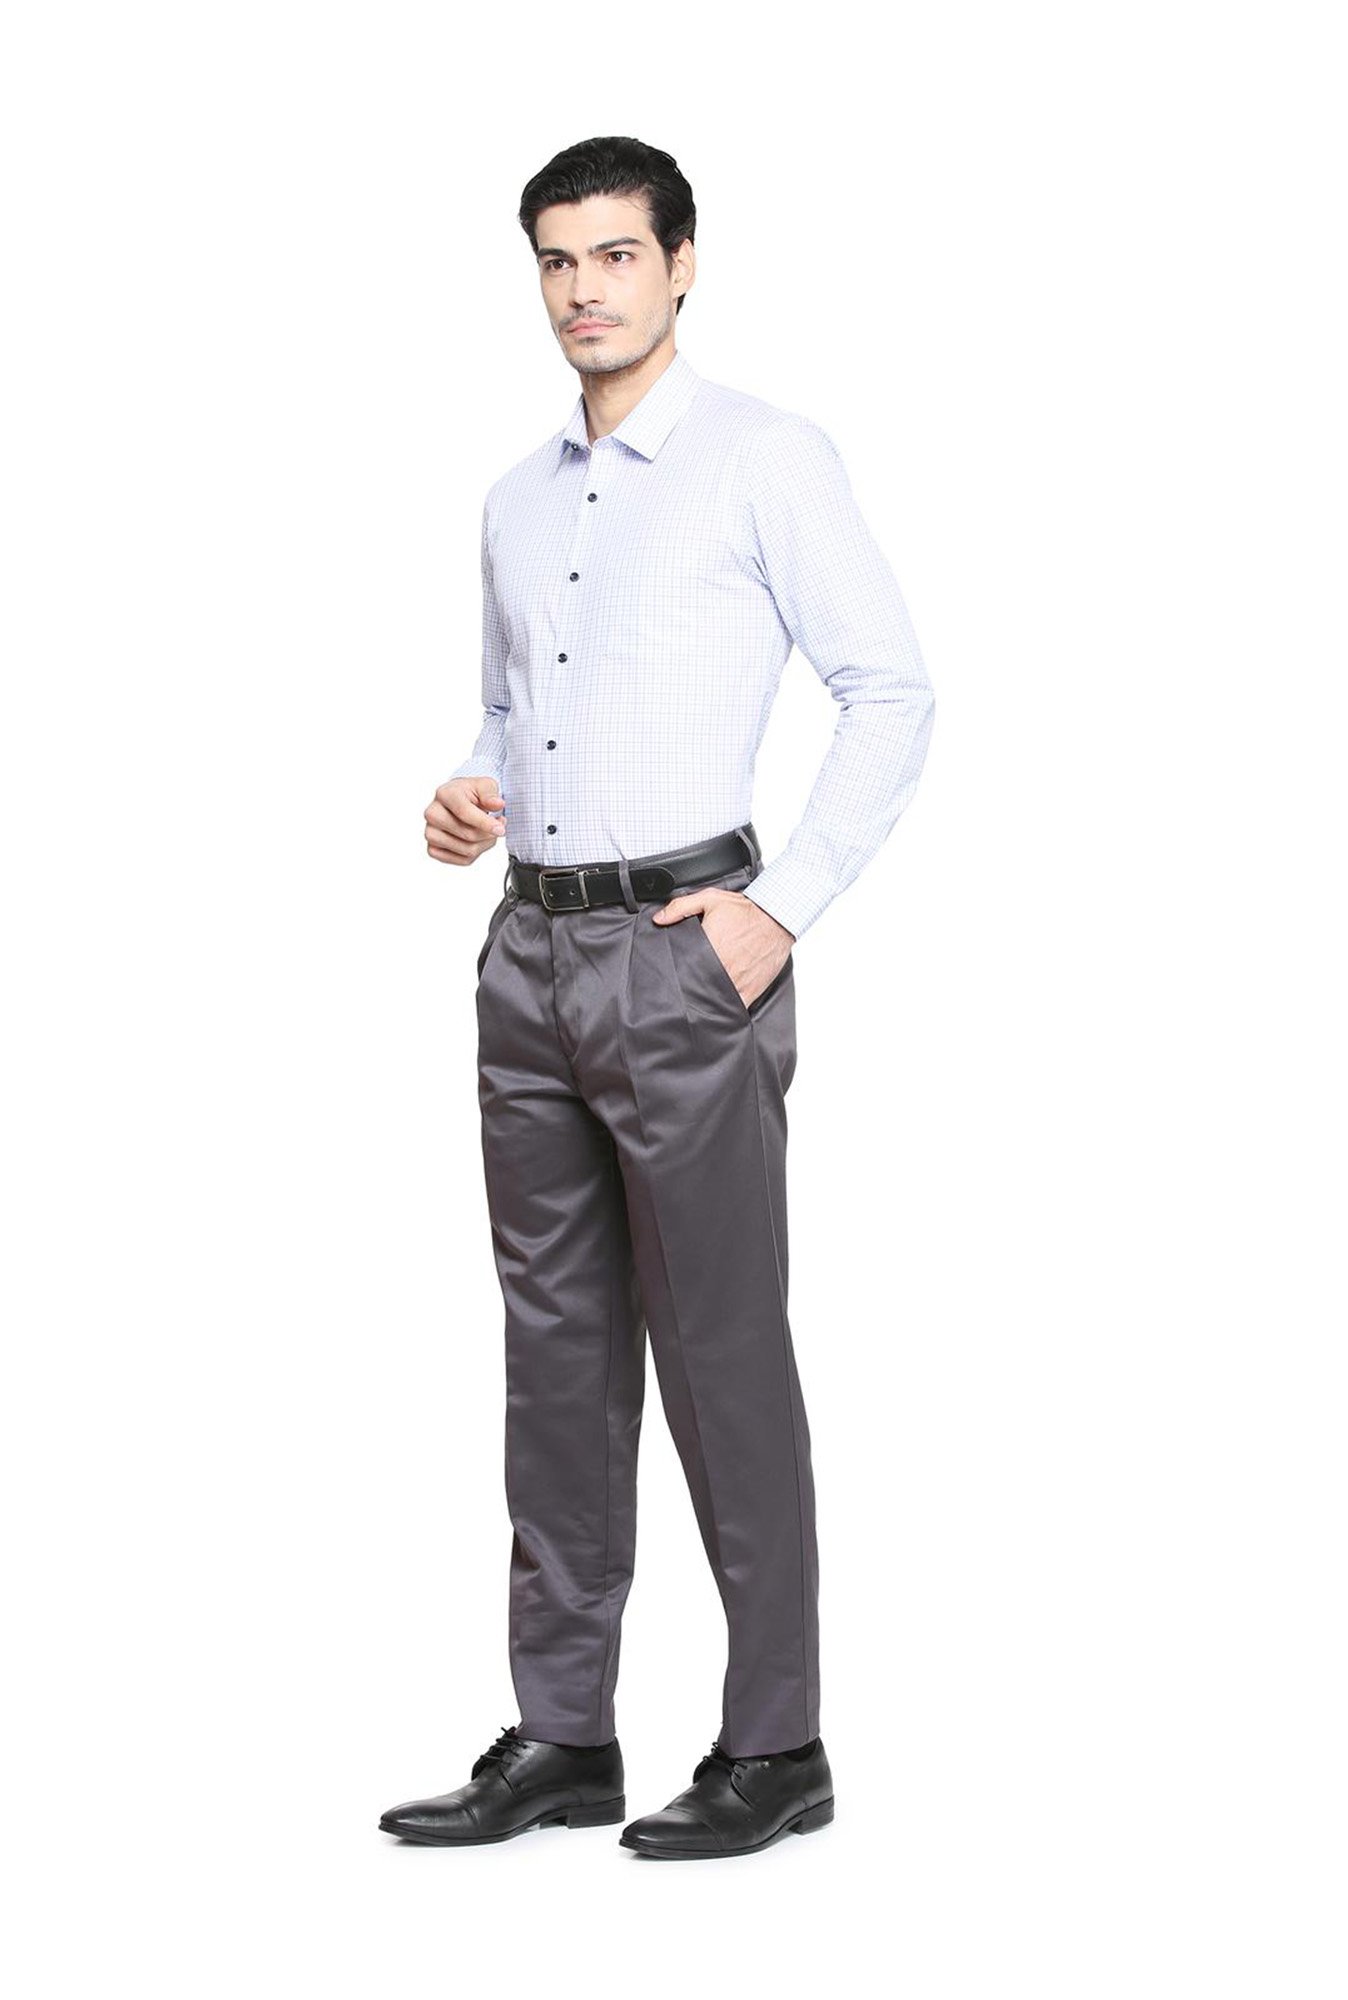 Seychelles Dijon Winter Weight Cotton Twill Classic and Tailored Fit Pants